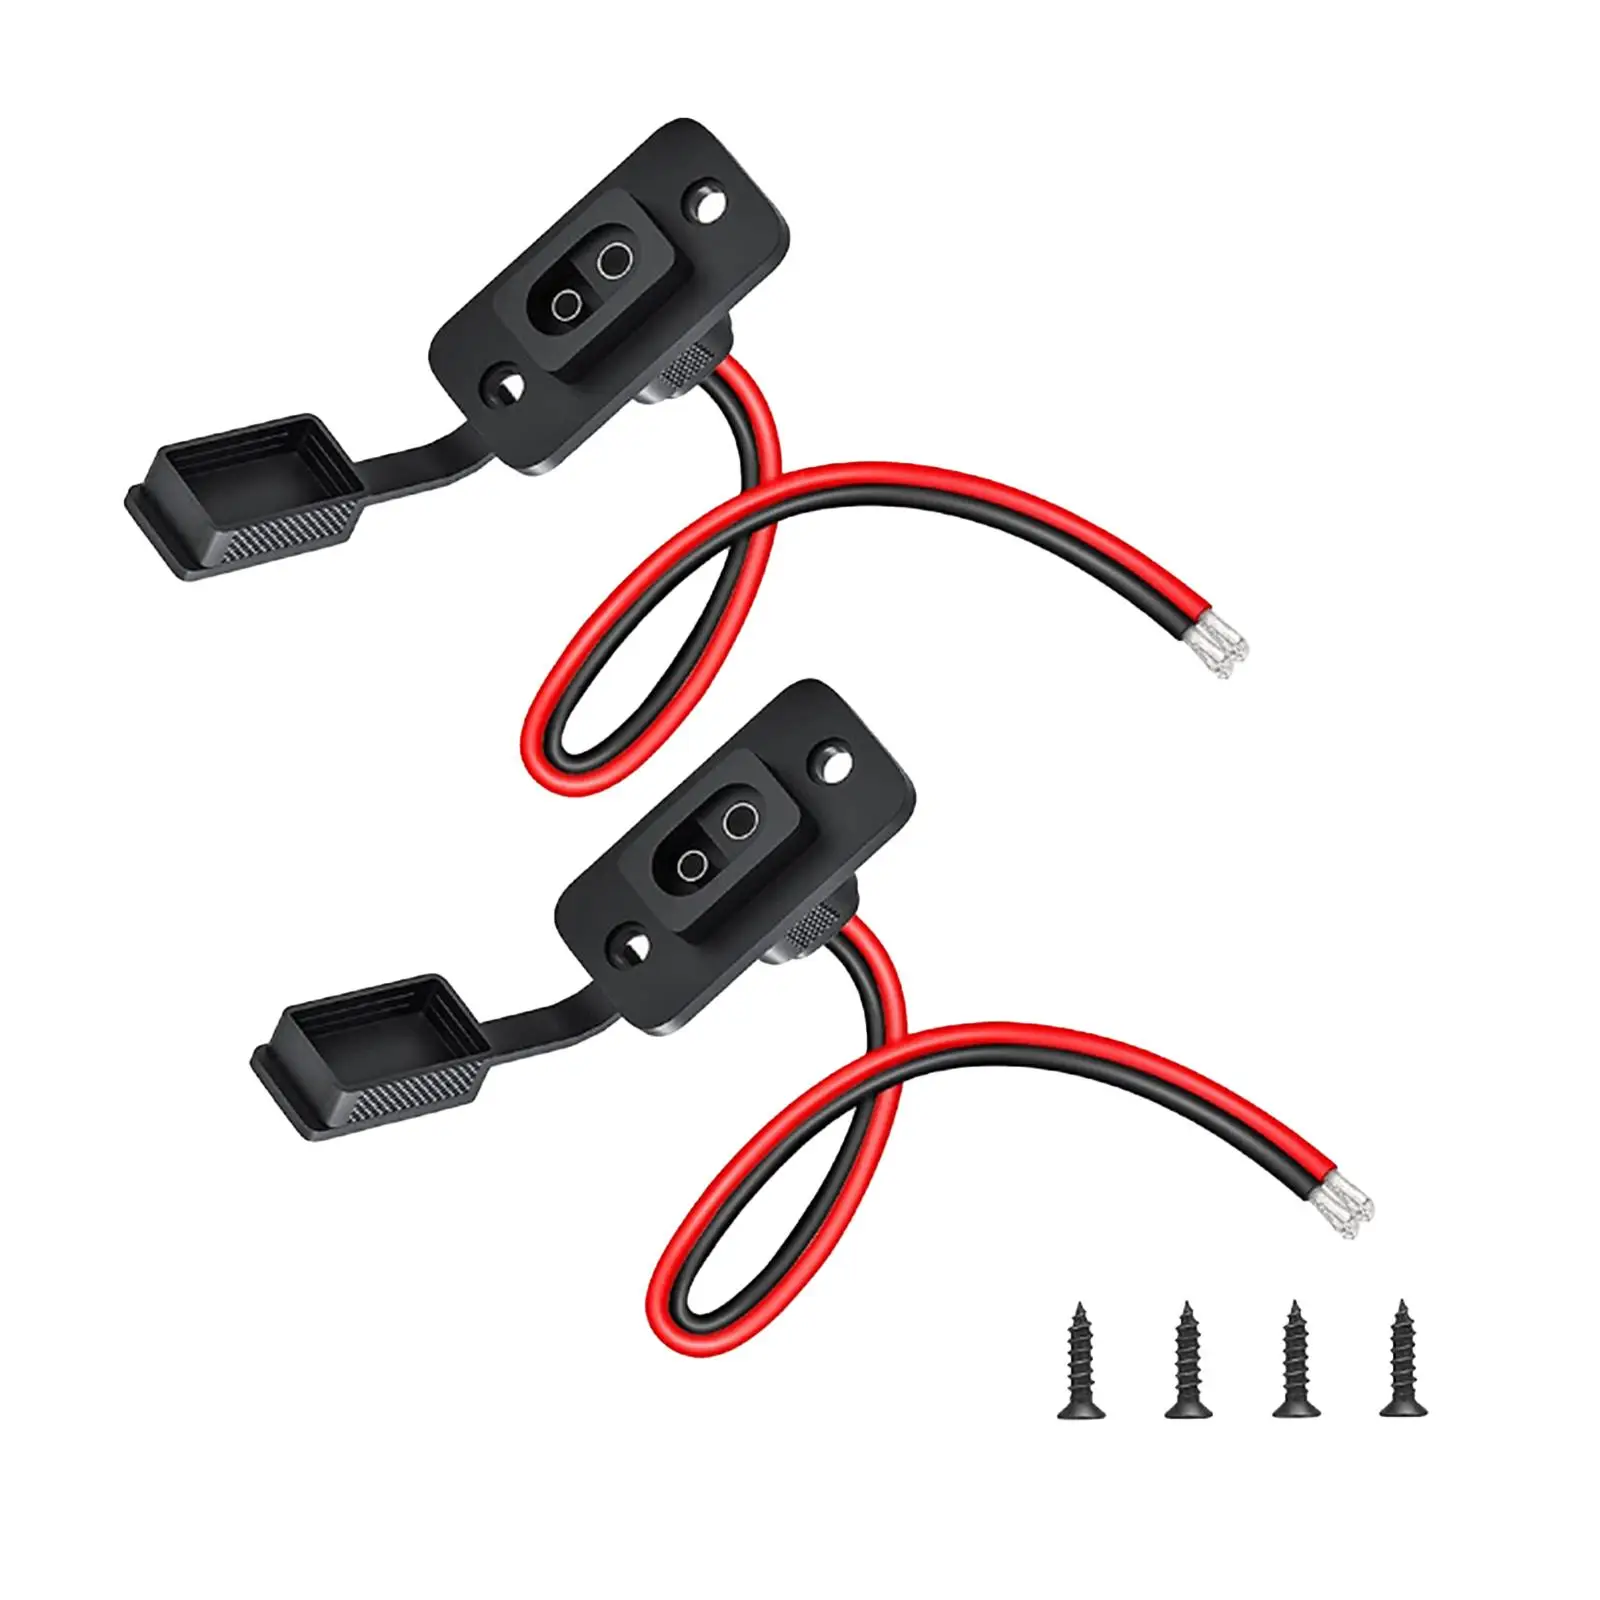 2x SAE Socket Flush-mountable Heavy Duty Boats RV Male Plug to Female Socket Cable Quick Connect Disconnect SAE Extension Cable